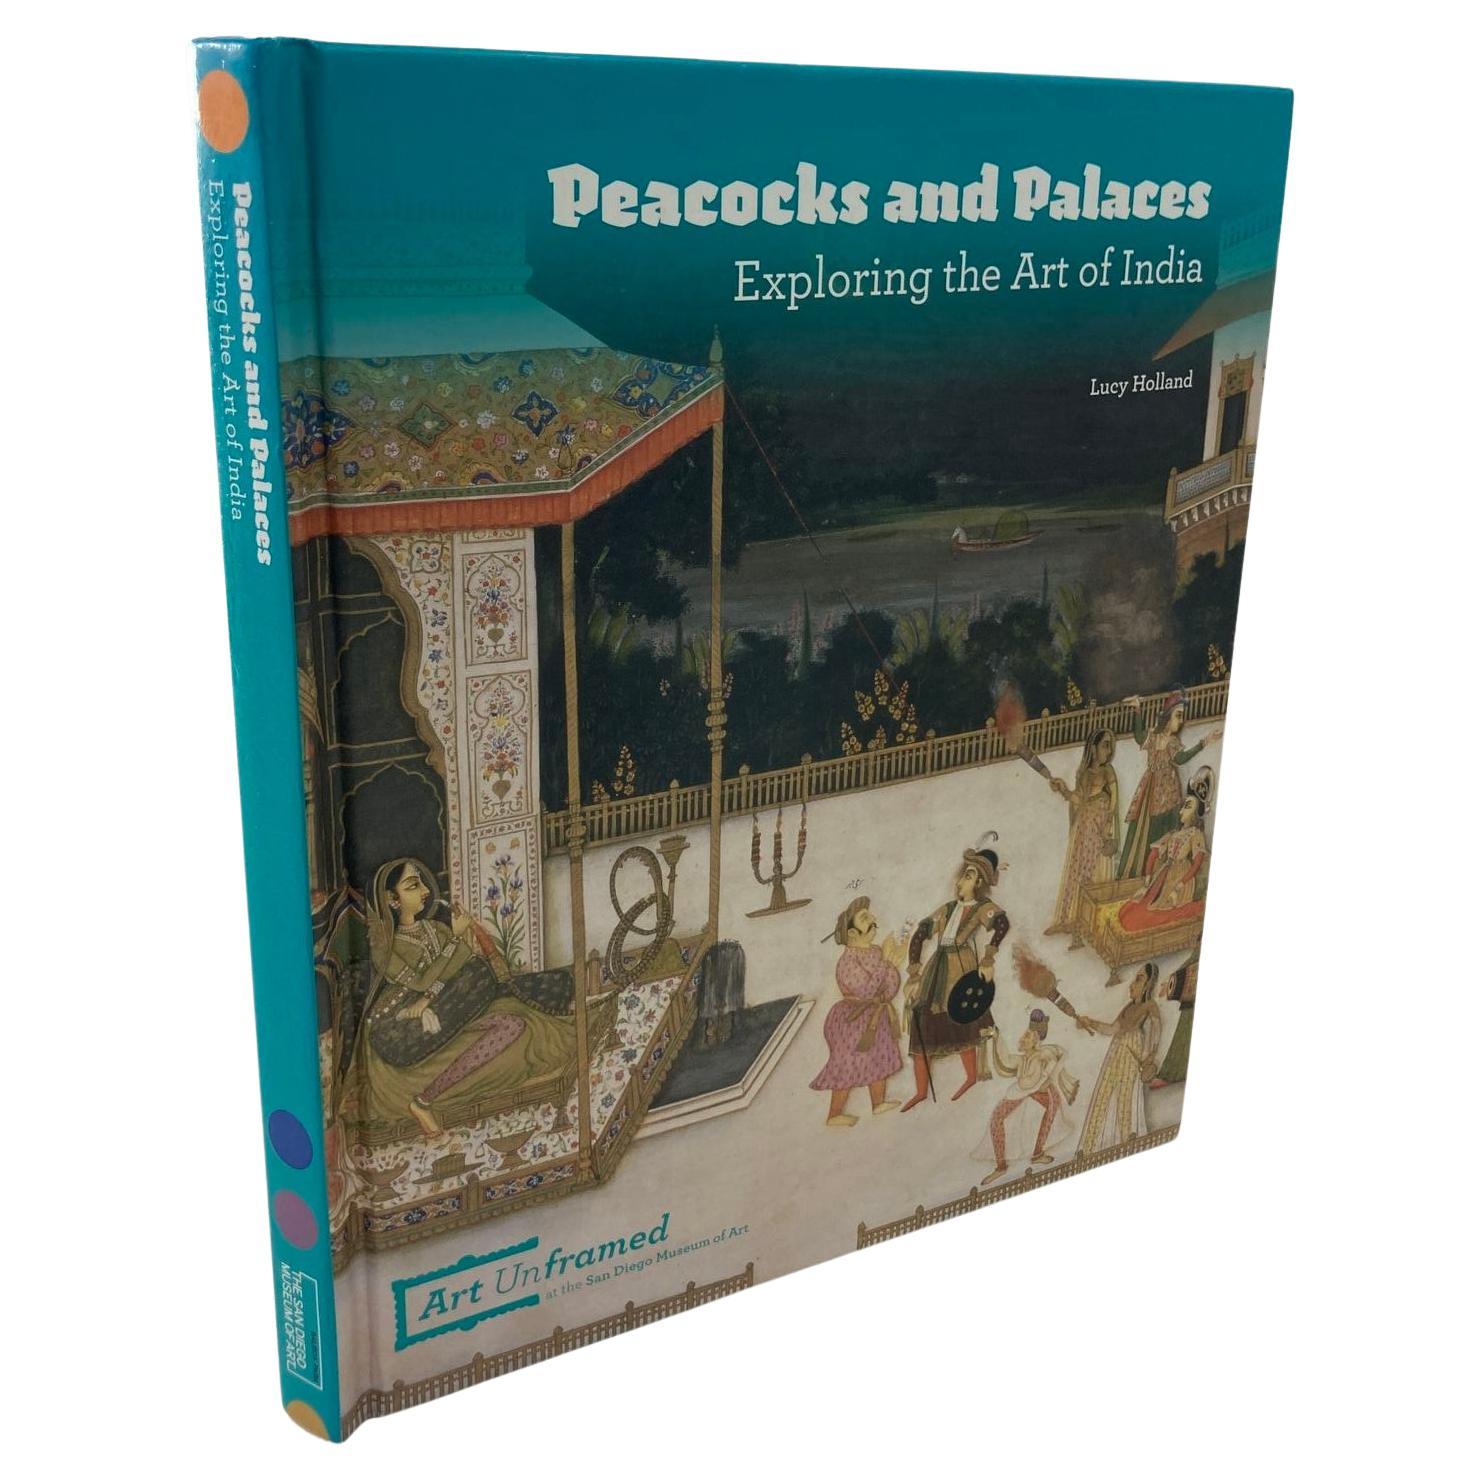 Peacocks and Palaces : Exploring the Art of India Hardcover Book by Lucy Holland